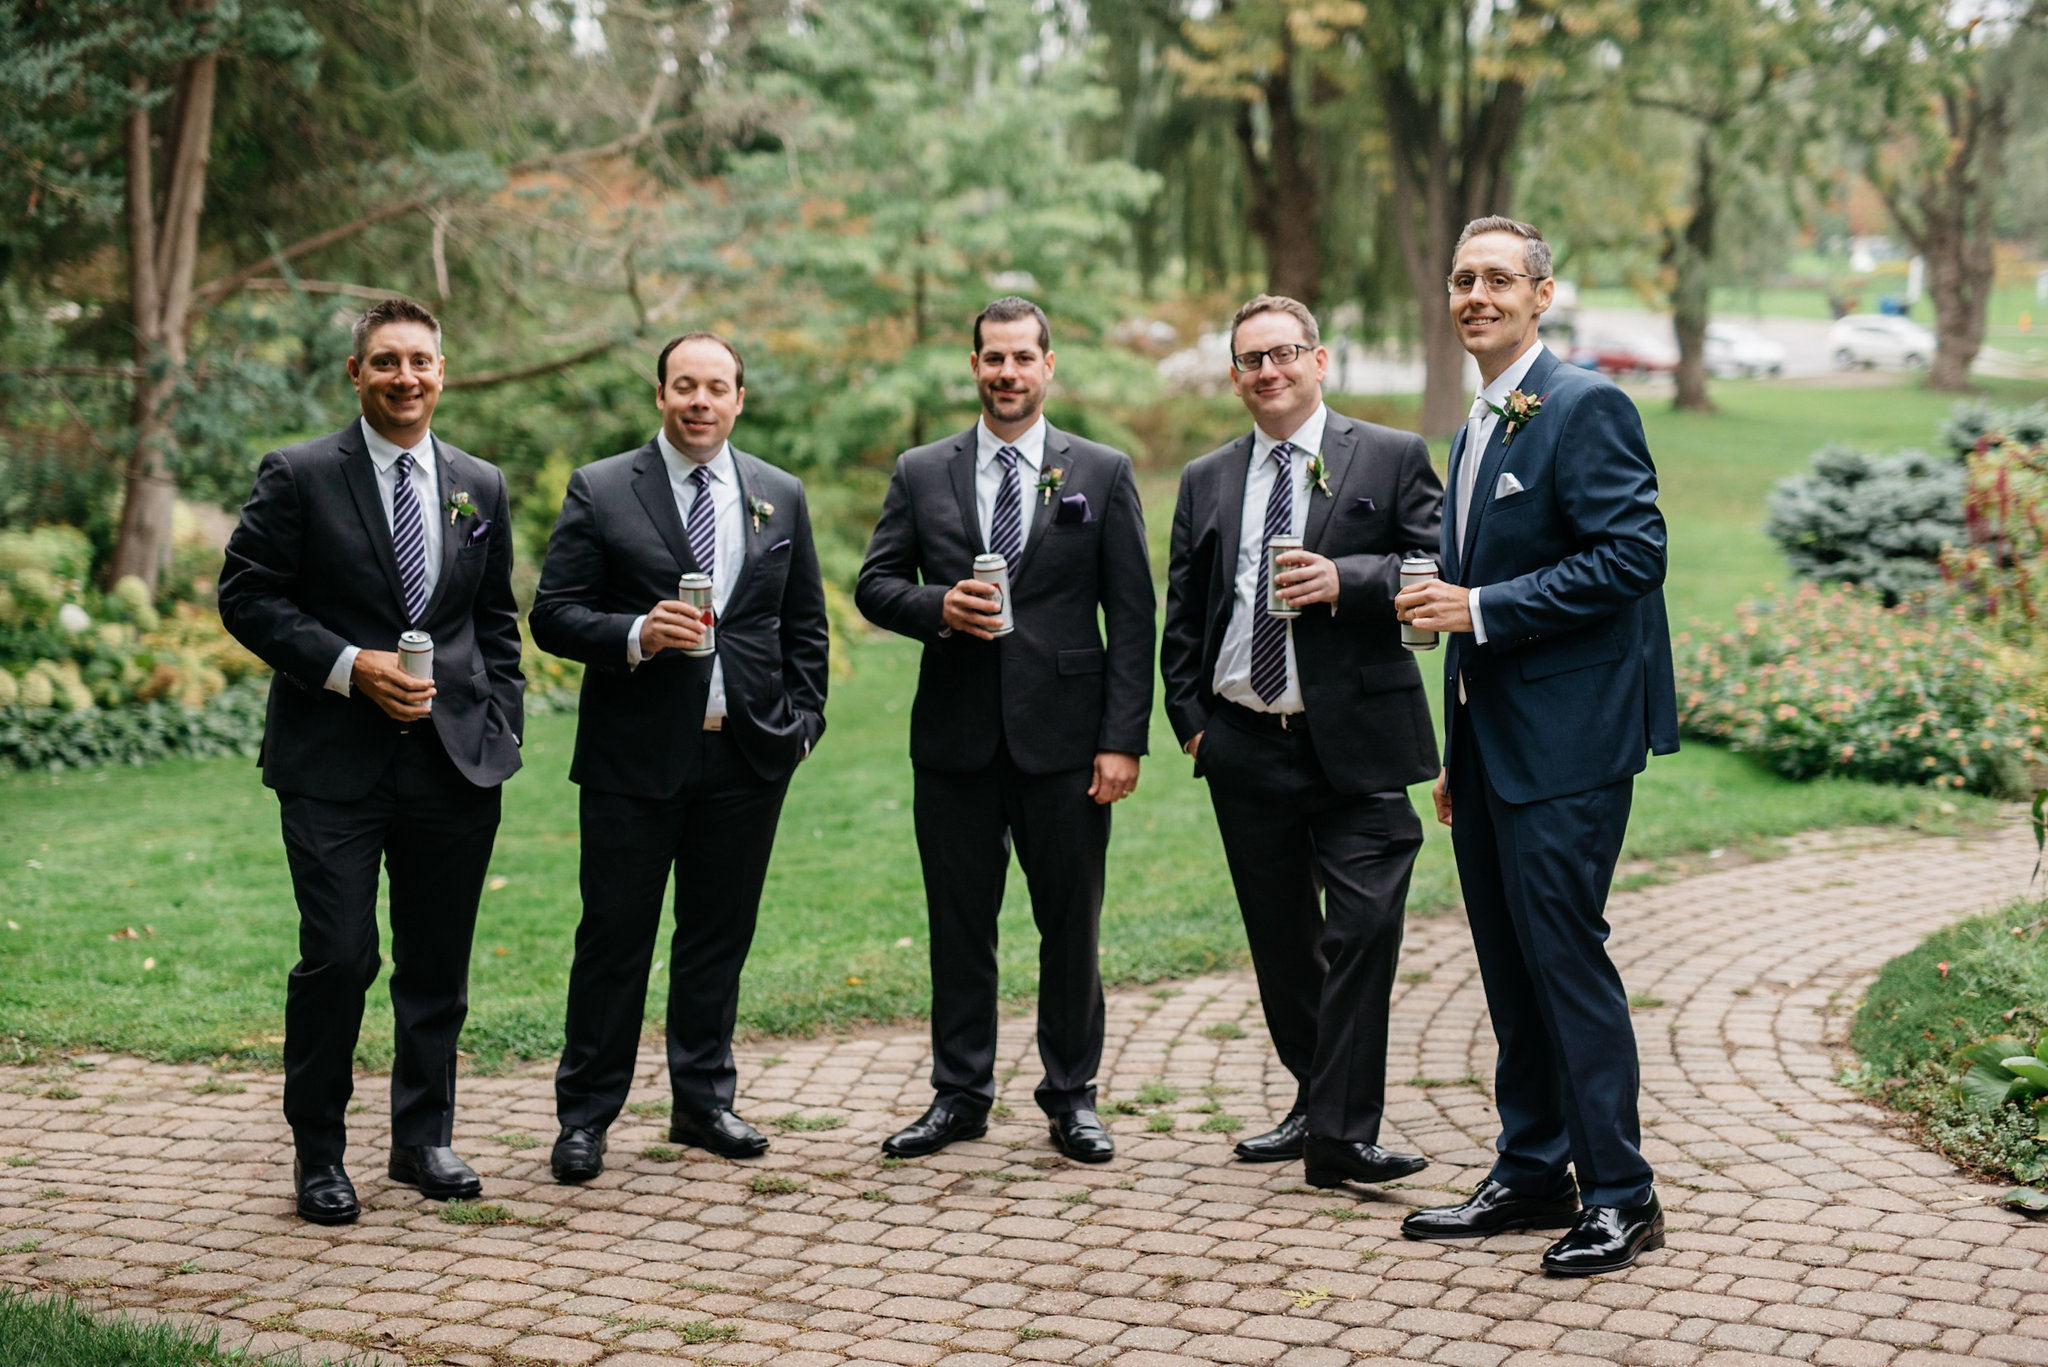 Groomsmen hanging out - Olive Photography Toronto